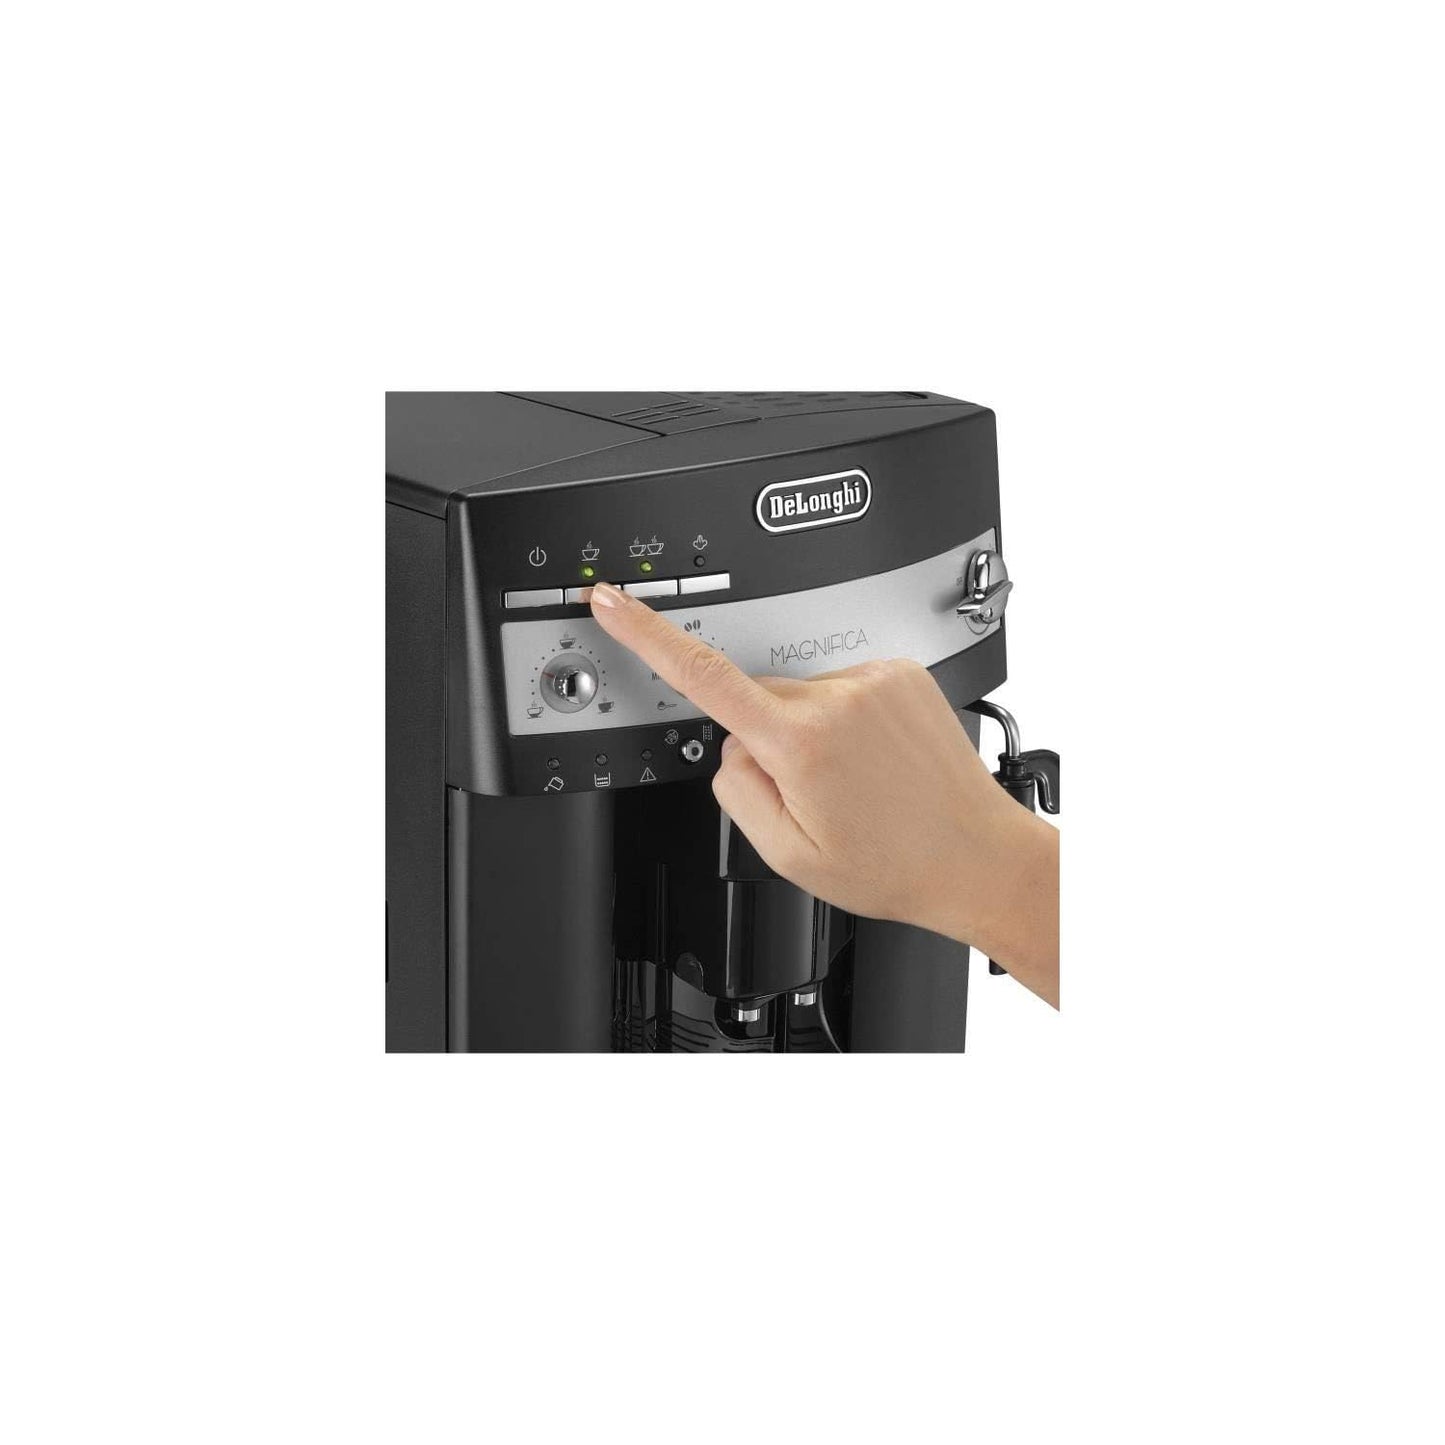 De'Longhi Fully Automatic Bean To Cup Coffee Machine With Built In Grinder, One Touch Espresso Maker, Italian Design, Best For Home & Office, Magnifica, Black, Esam3000.B